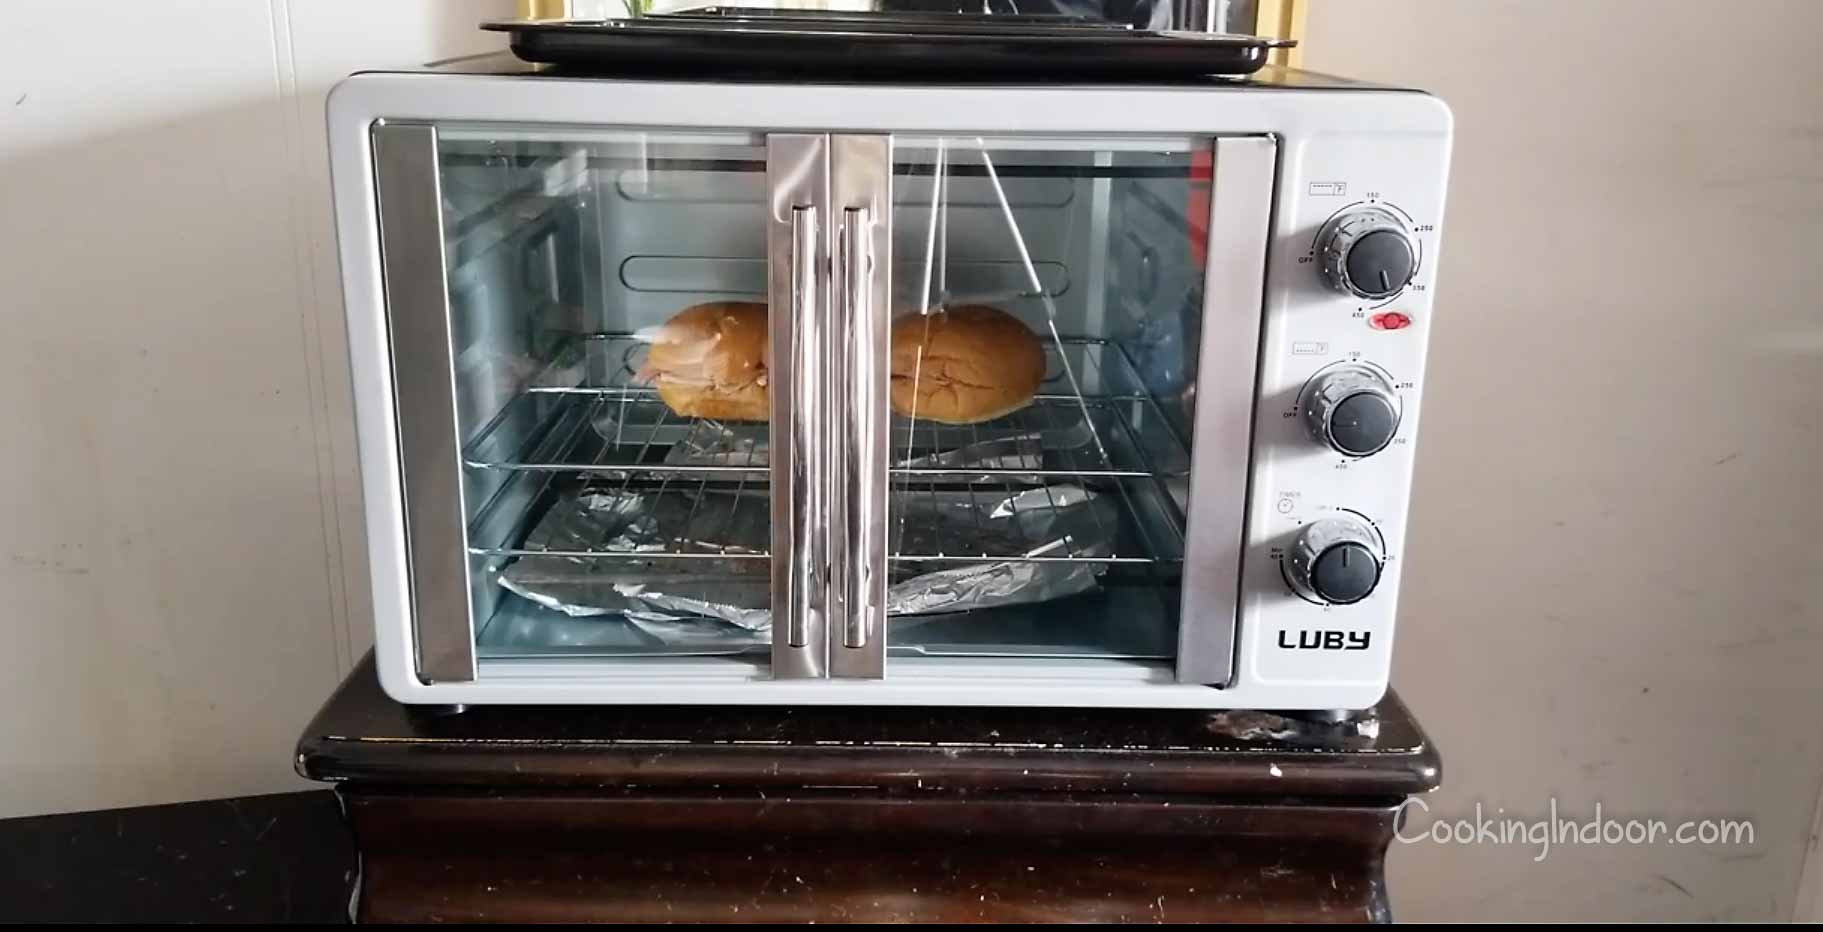 Best extra large toaster oven